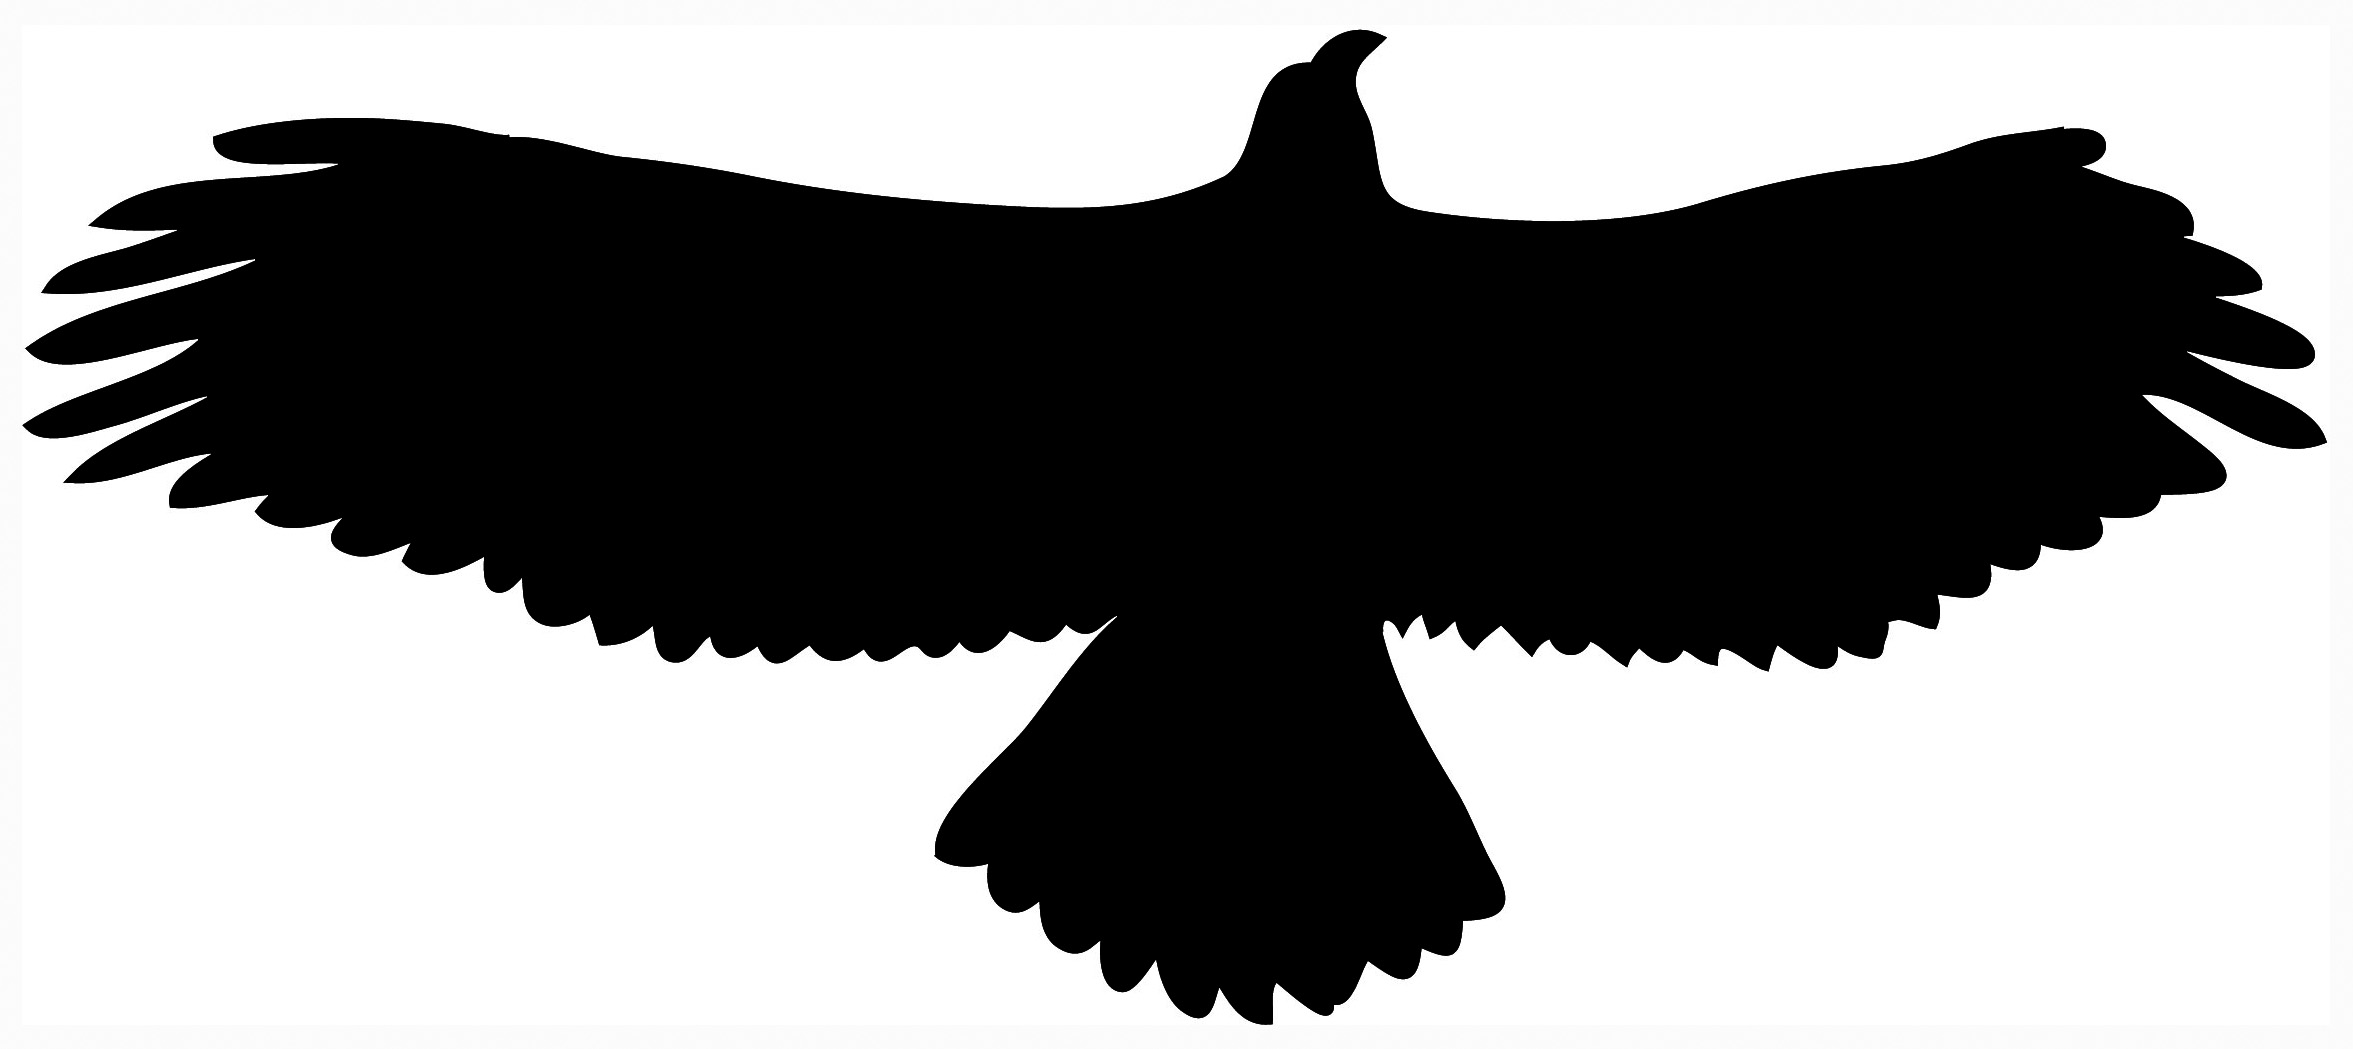 flying eagle clip art free download - photo #33